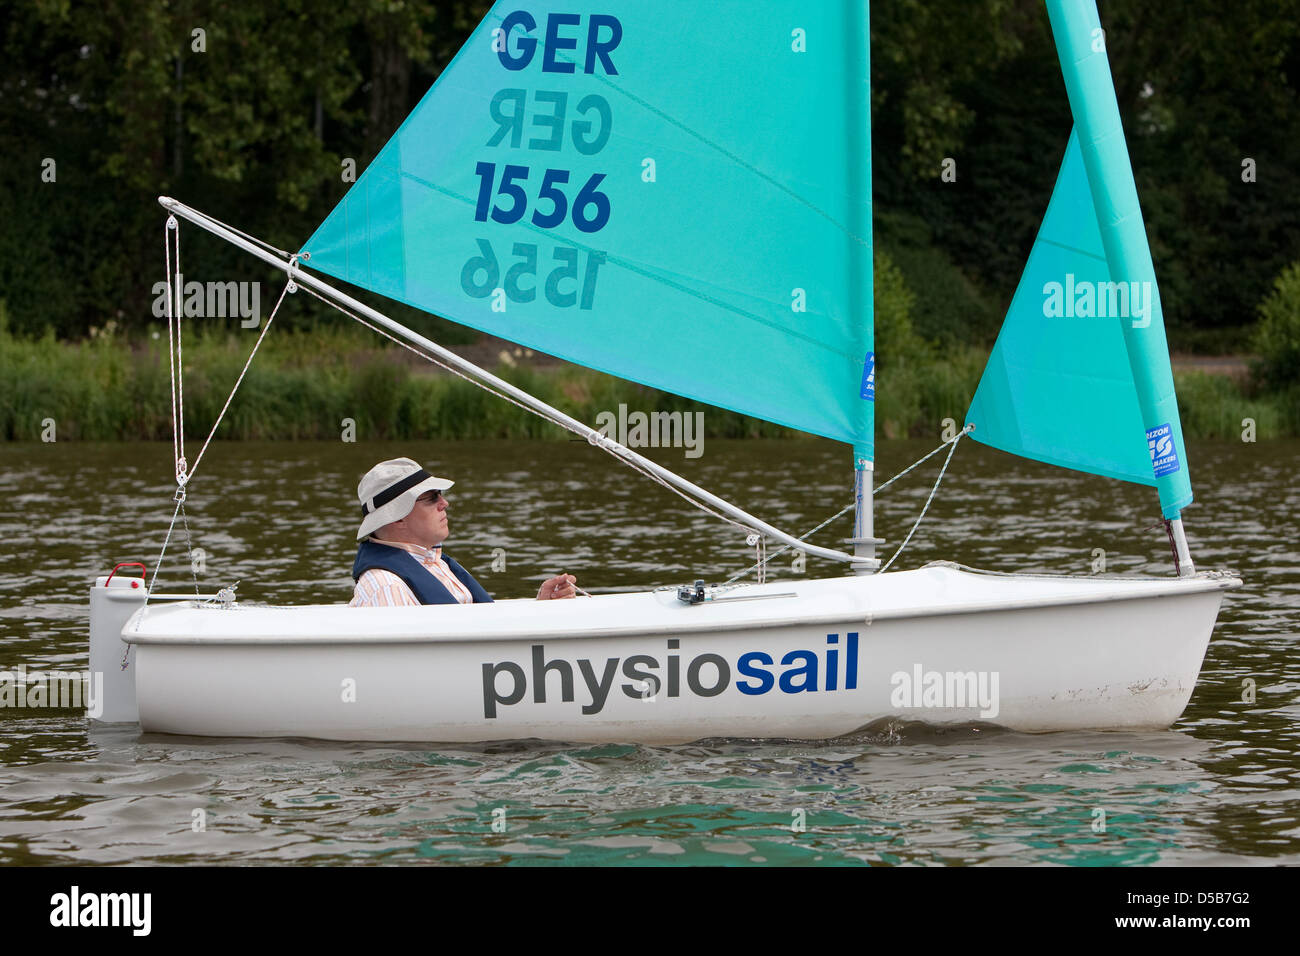 Hemiplegic Klaus Dinter sails with the 'Access Dinghi' on the Aasee near Muenster, Germany, 01 July 2010. Germany's only sailing therapy school 'physiosail' offers sailing therapy for the handicapped. Photo: Friso Gentsch Stock Photo